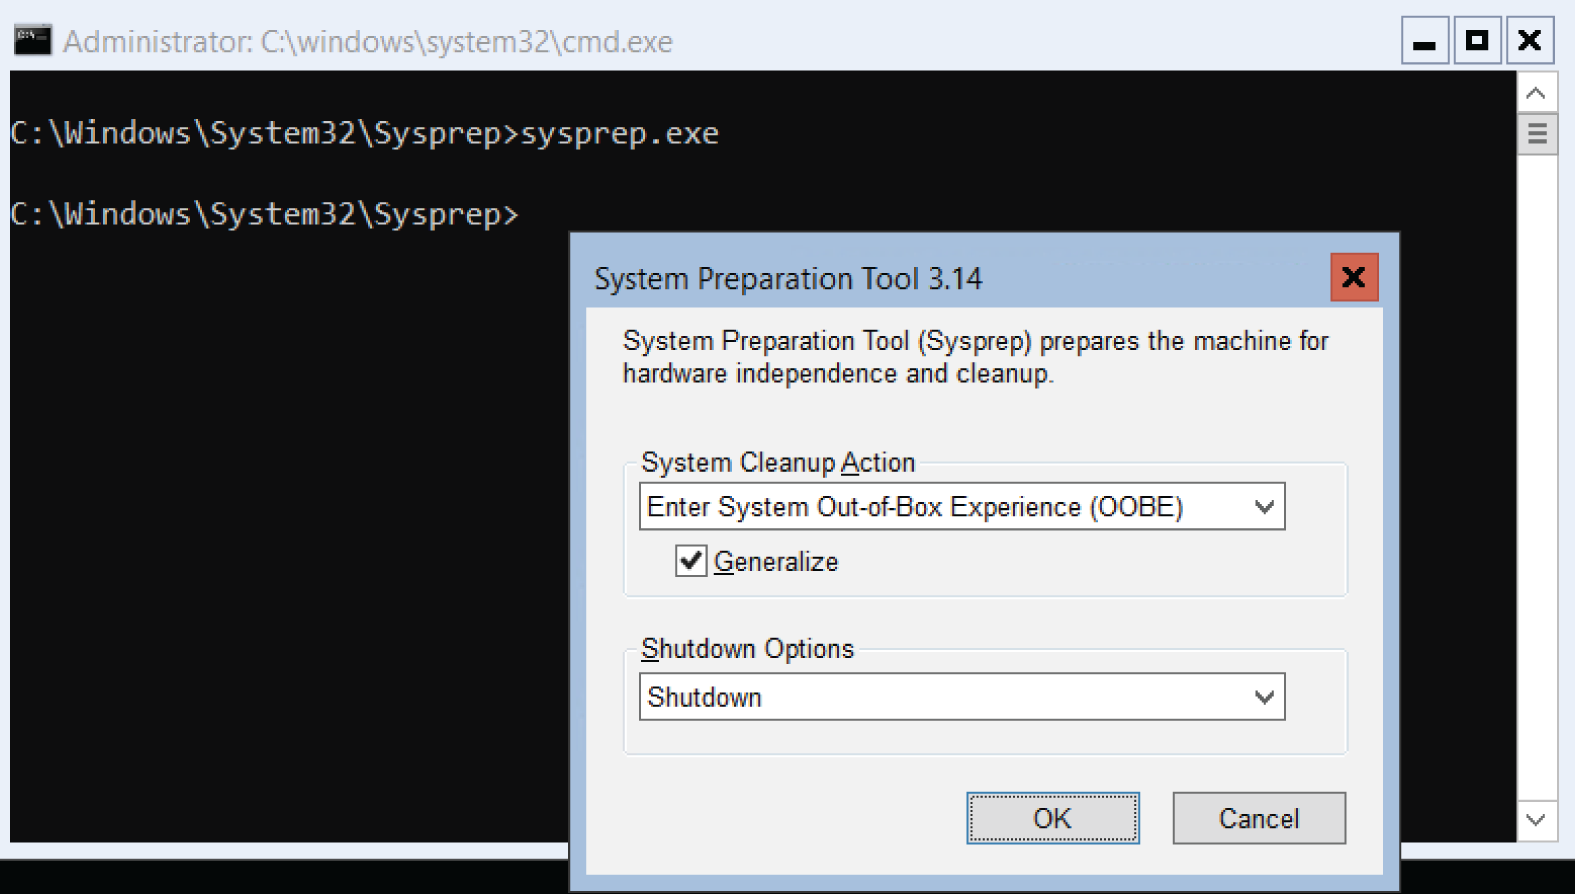 Snapshot of how to prepare an Azure VM for imaging using Sysprep.